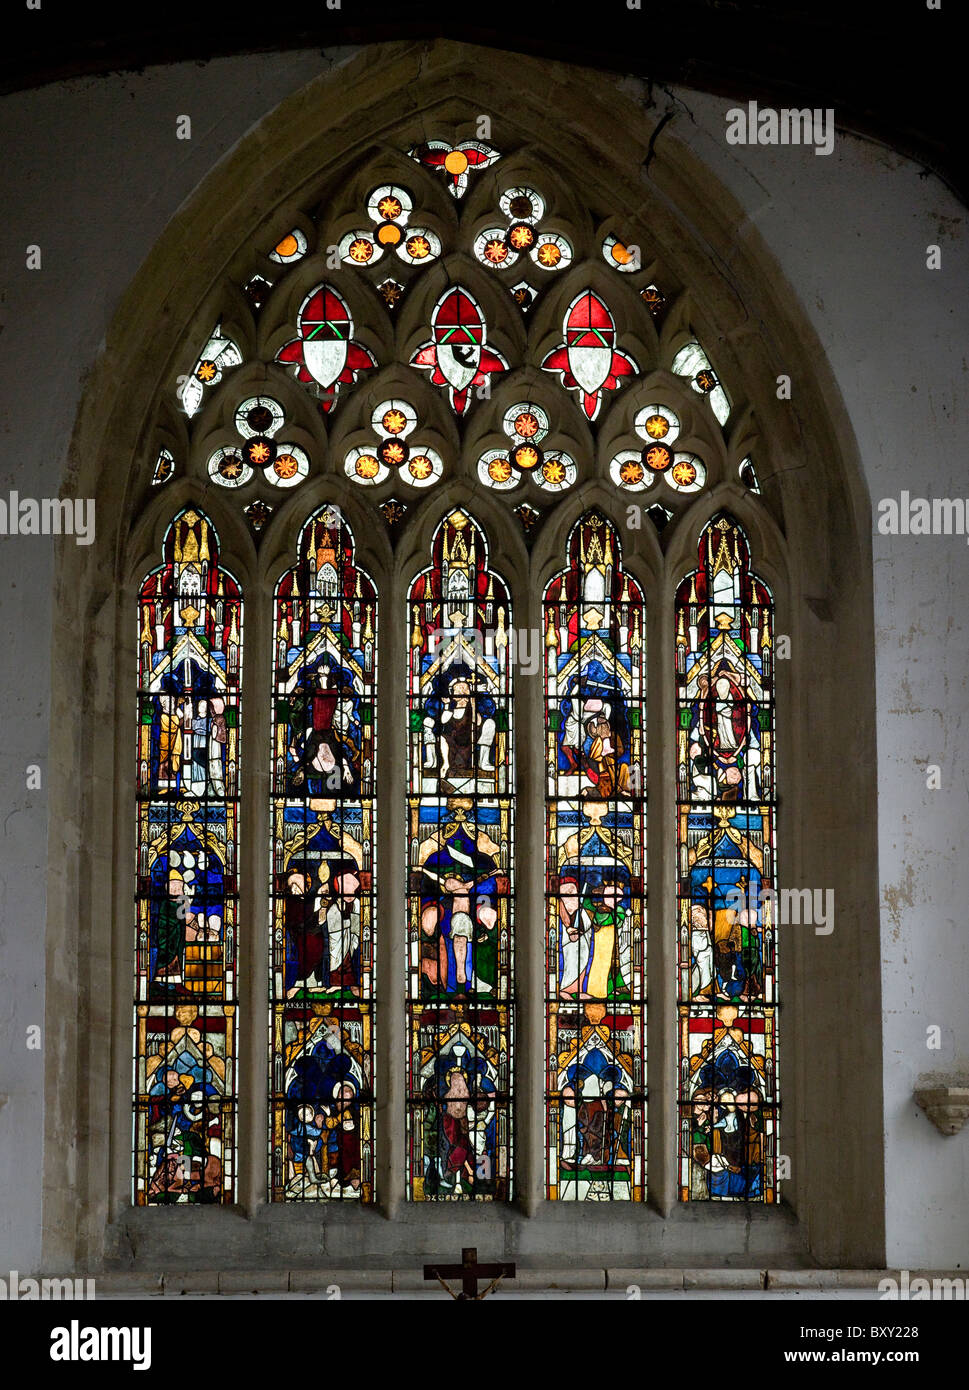 North Moreton, Berkshire. All Saints church, stained glass window c.1300, with Crucifixion Stock Photo